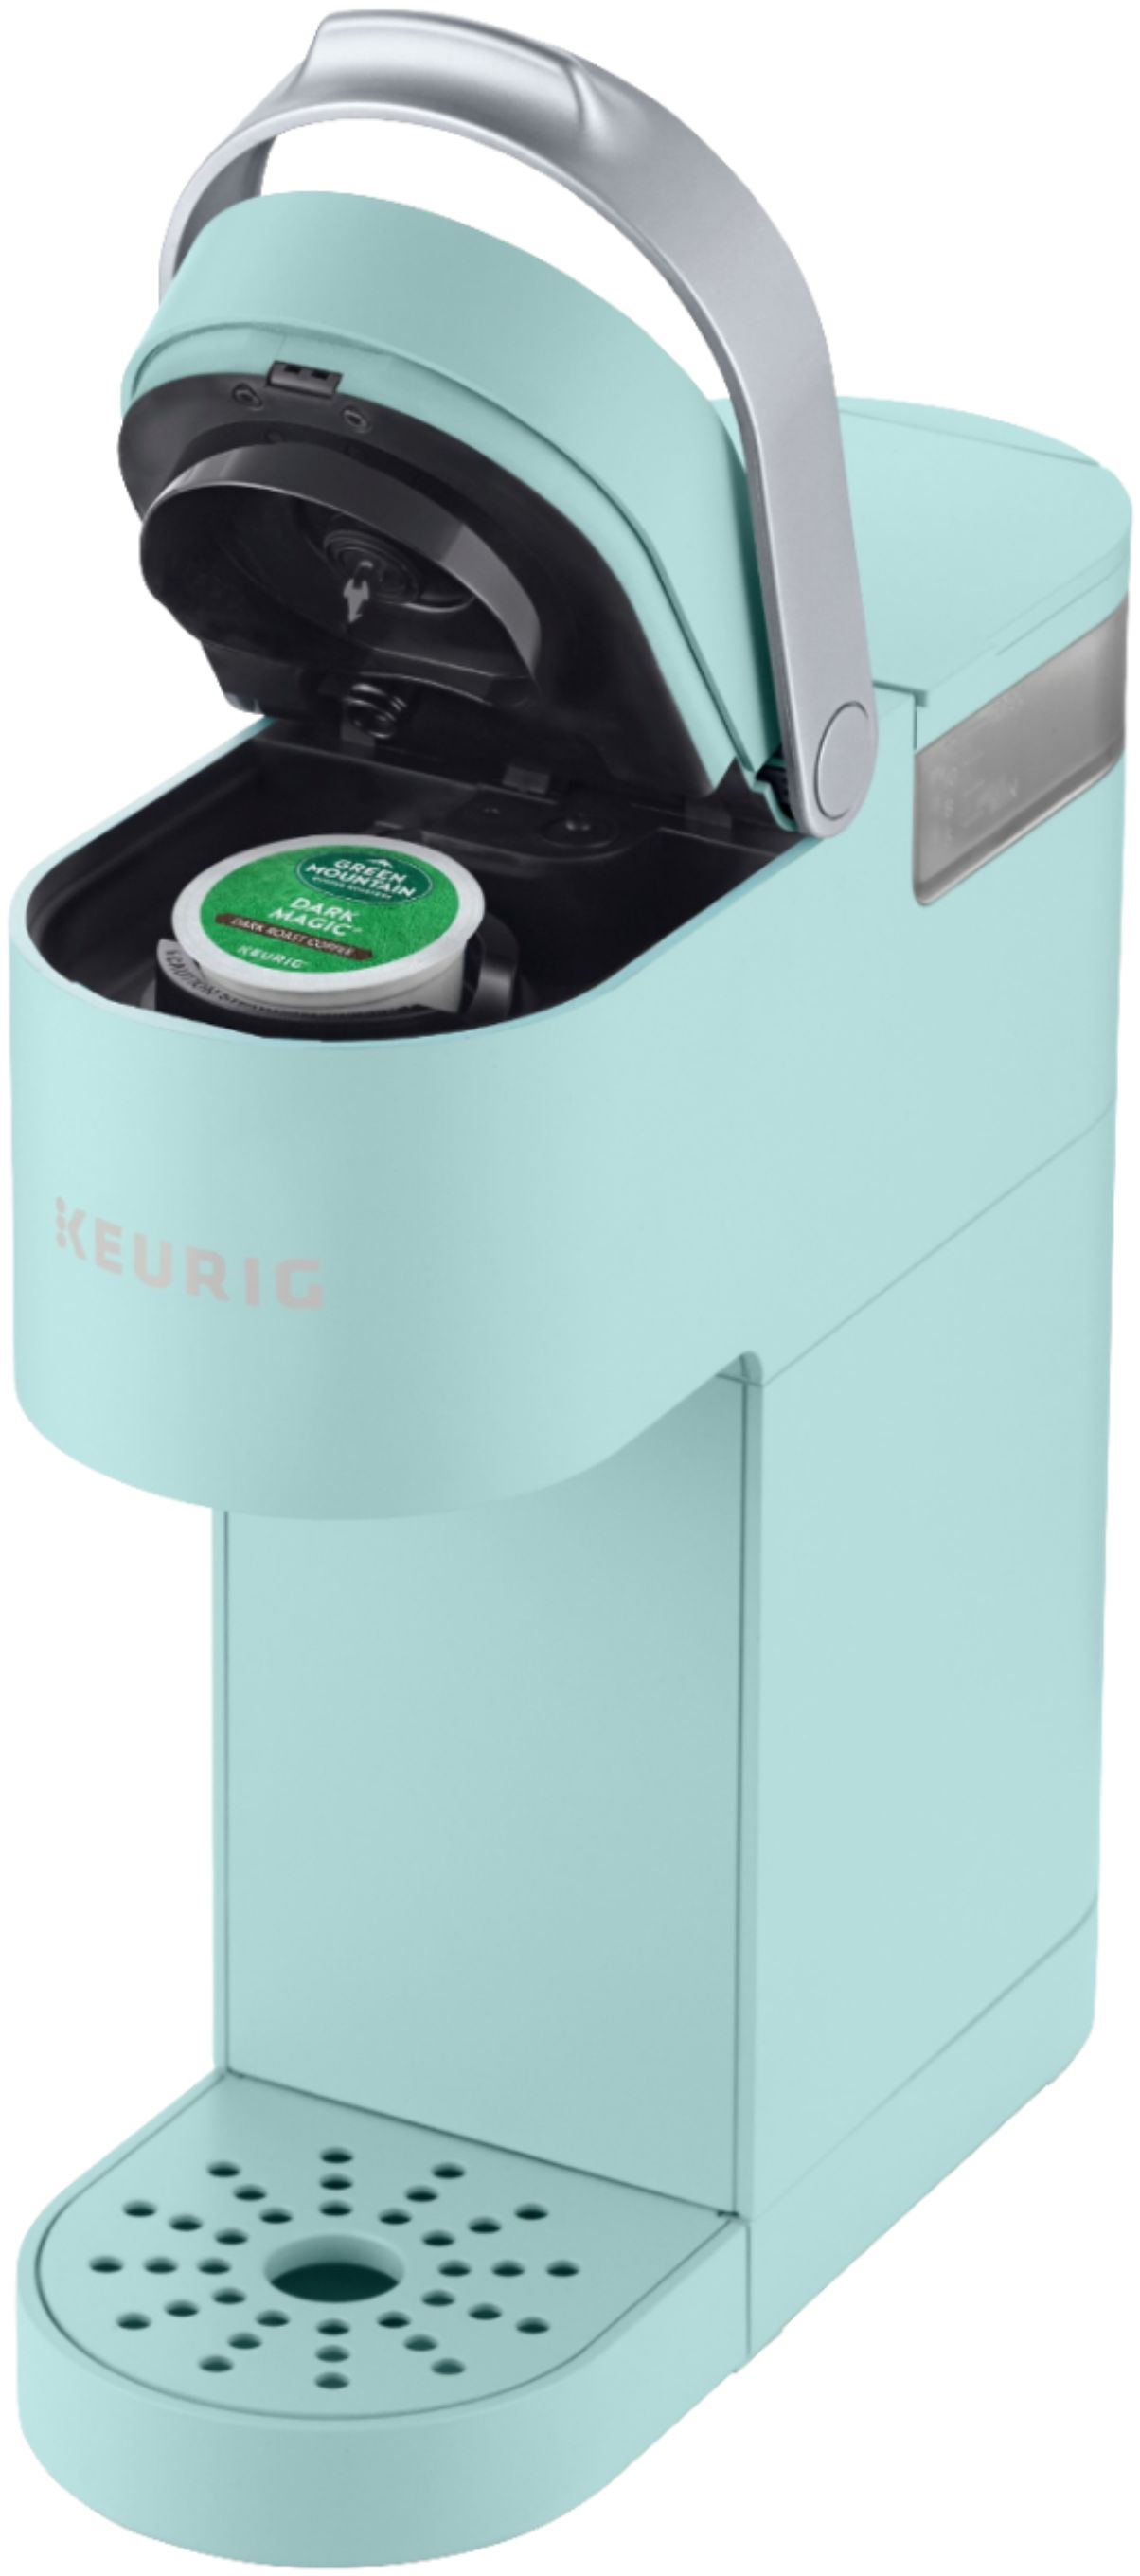 Mint Green Cuisinart Electric Tall Can Opener , Oasis/mint Green Kitchen,  Oasis Keurig, Pastel Green Smeg 